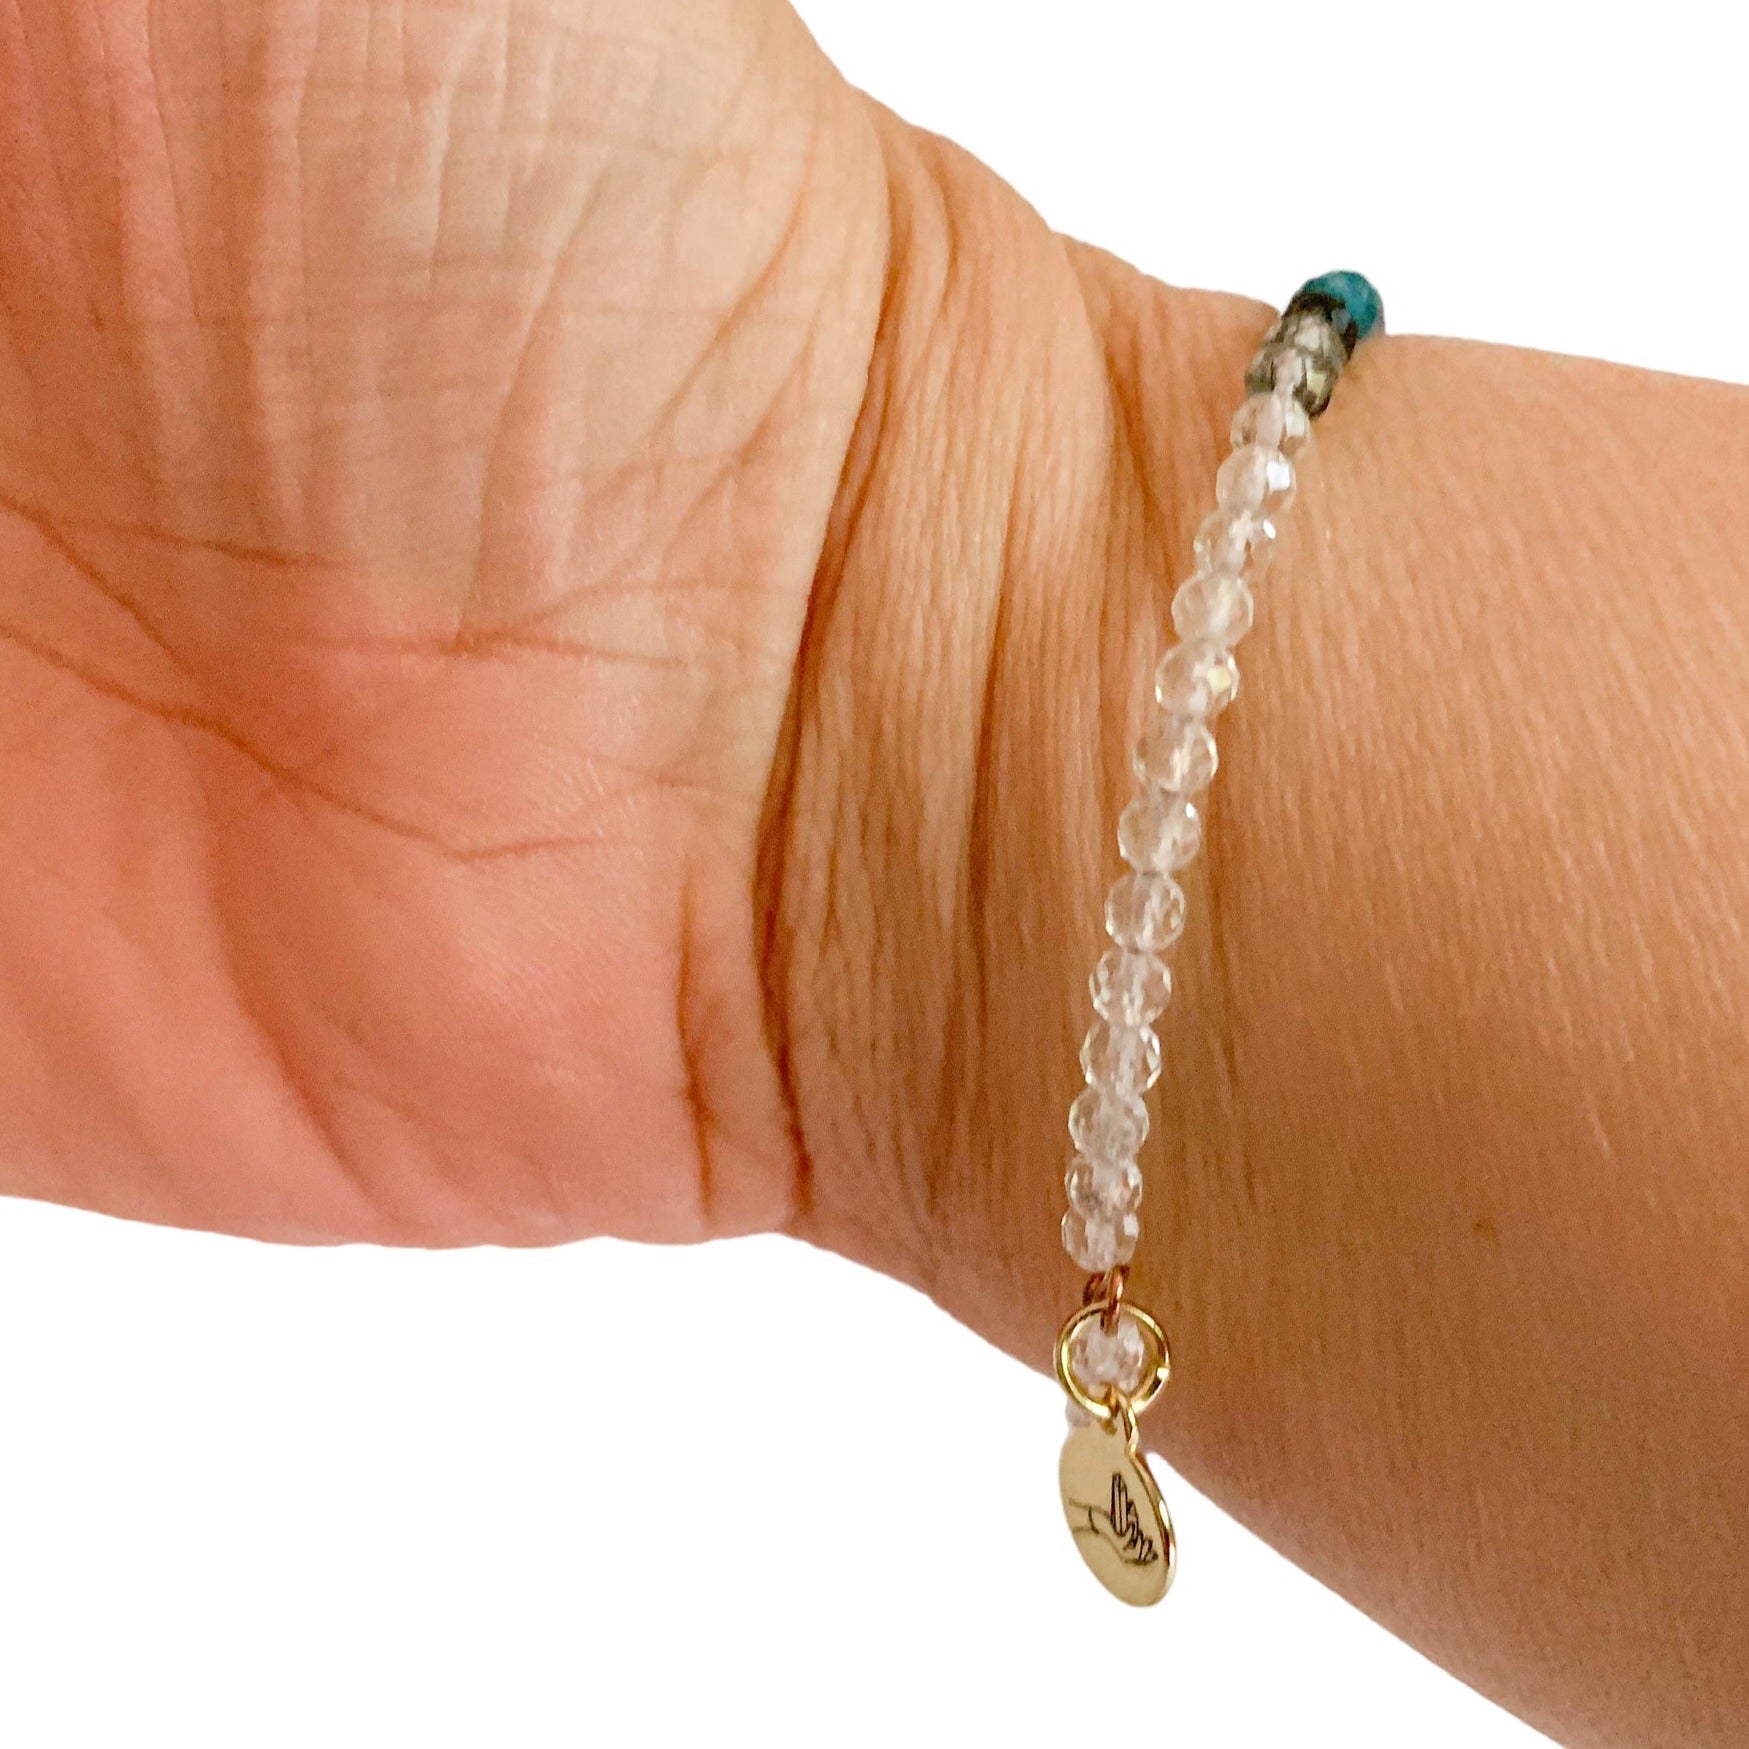 Person wearing Serenity Wrap Bracelet for peace and intention